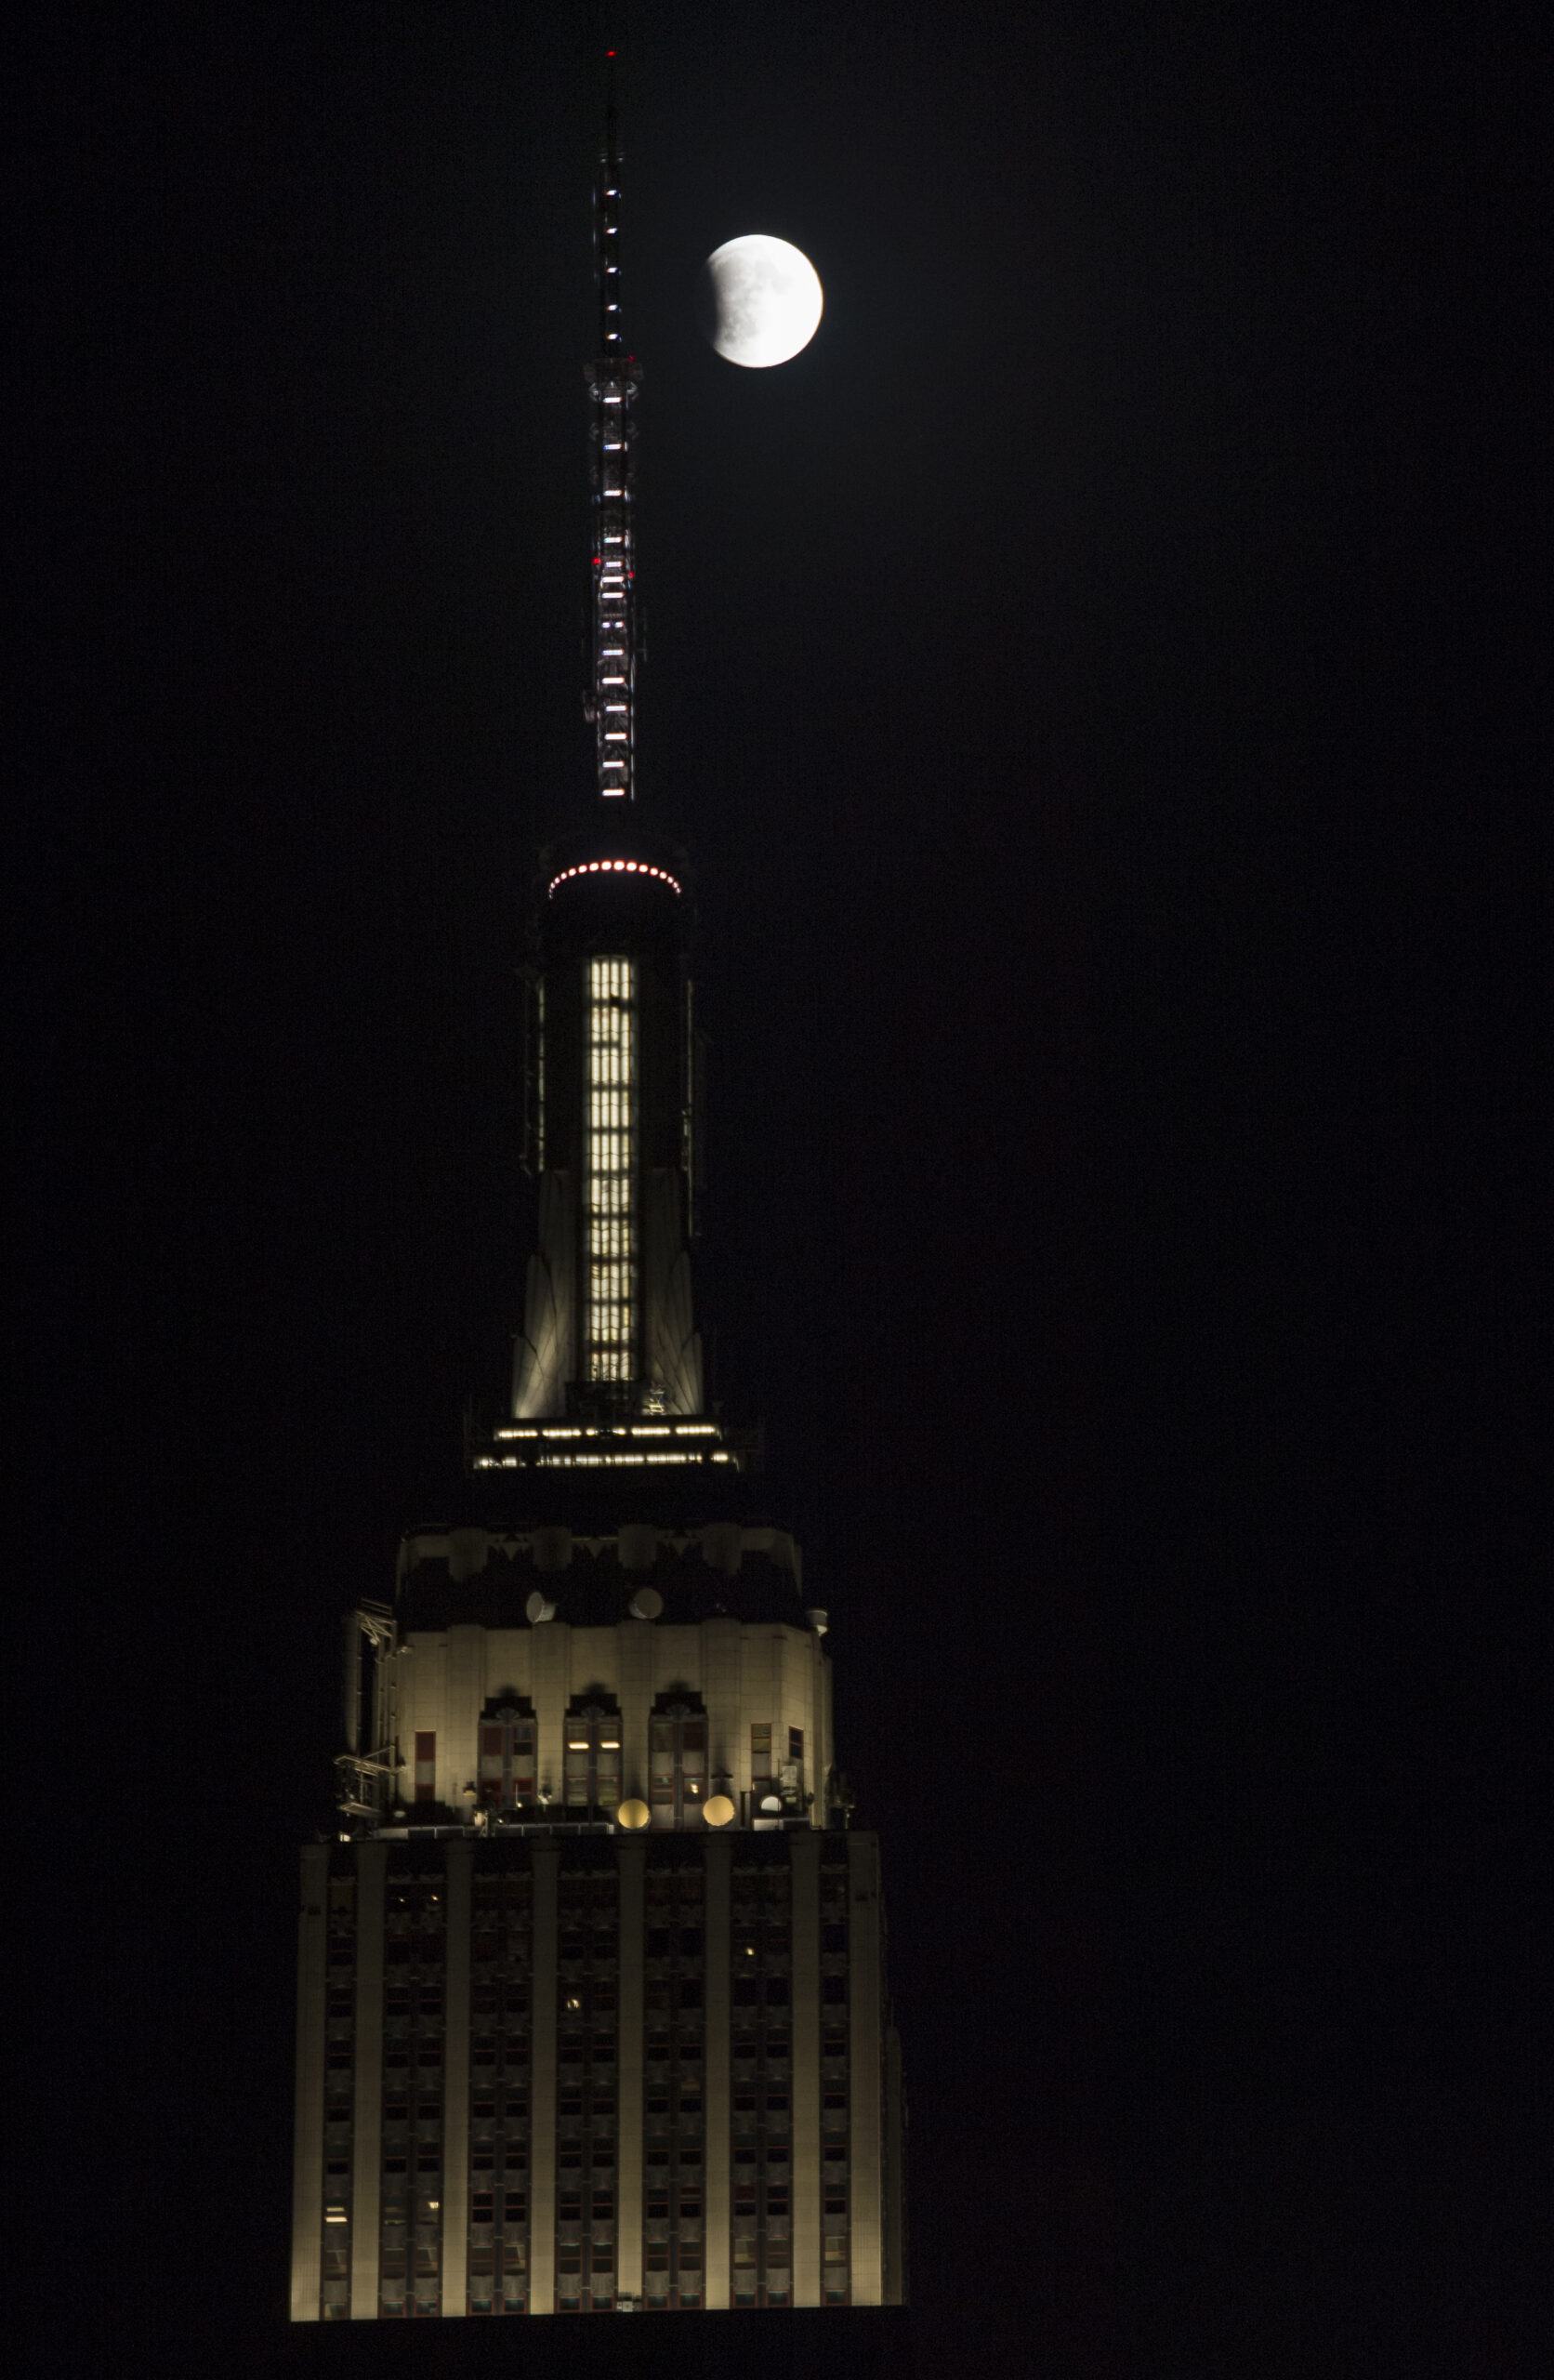 Full moon, Supermoon, Eclipse, Empire State Building at the beginning of a total lunar eclipse